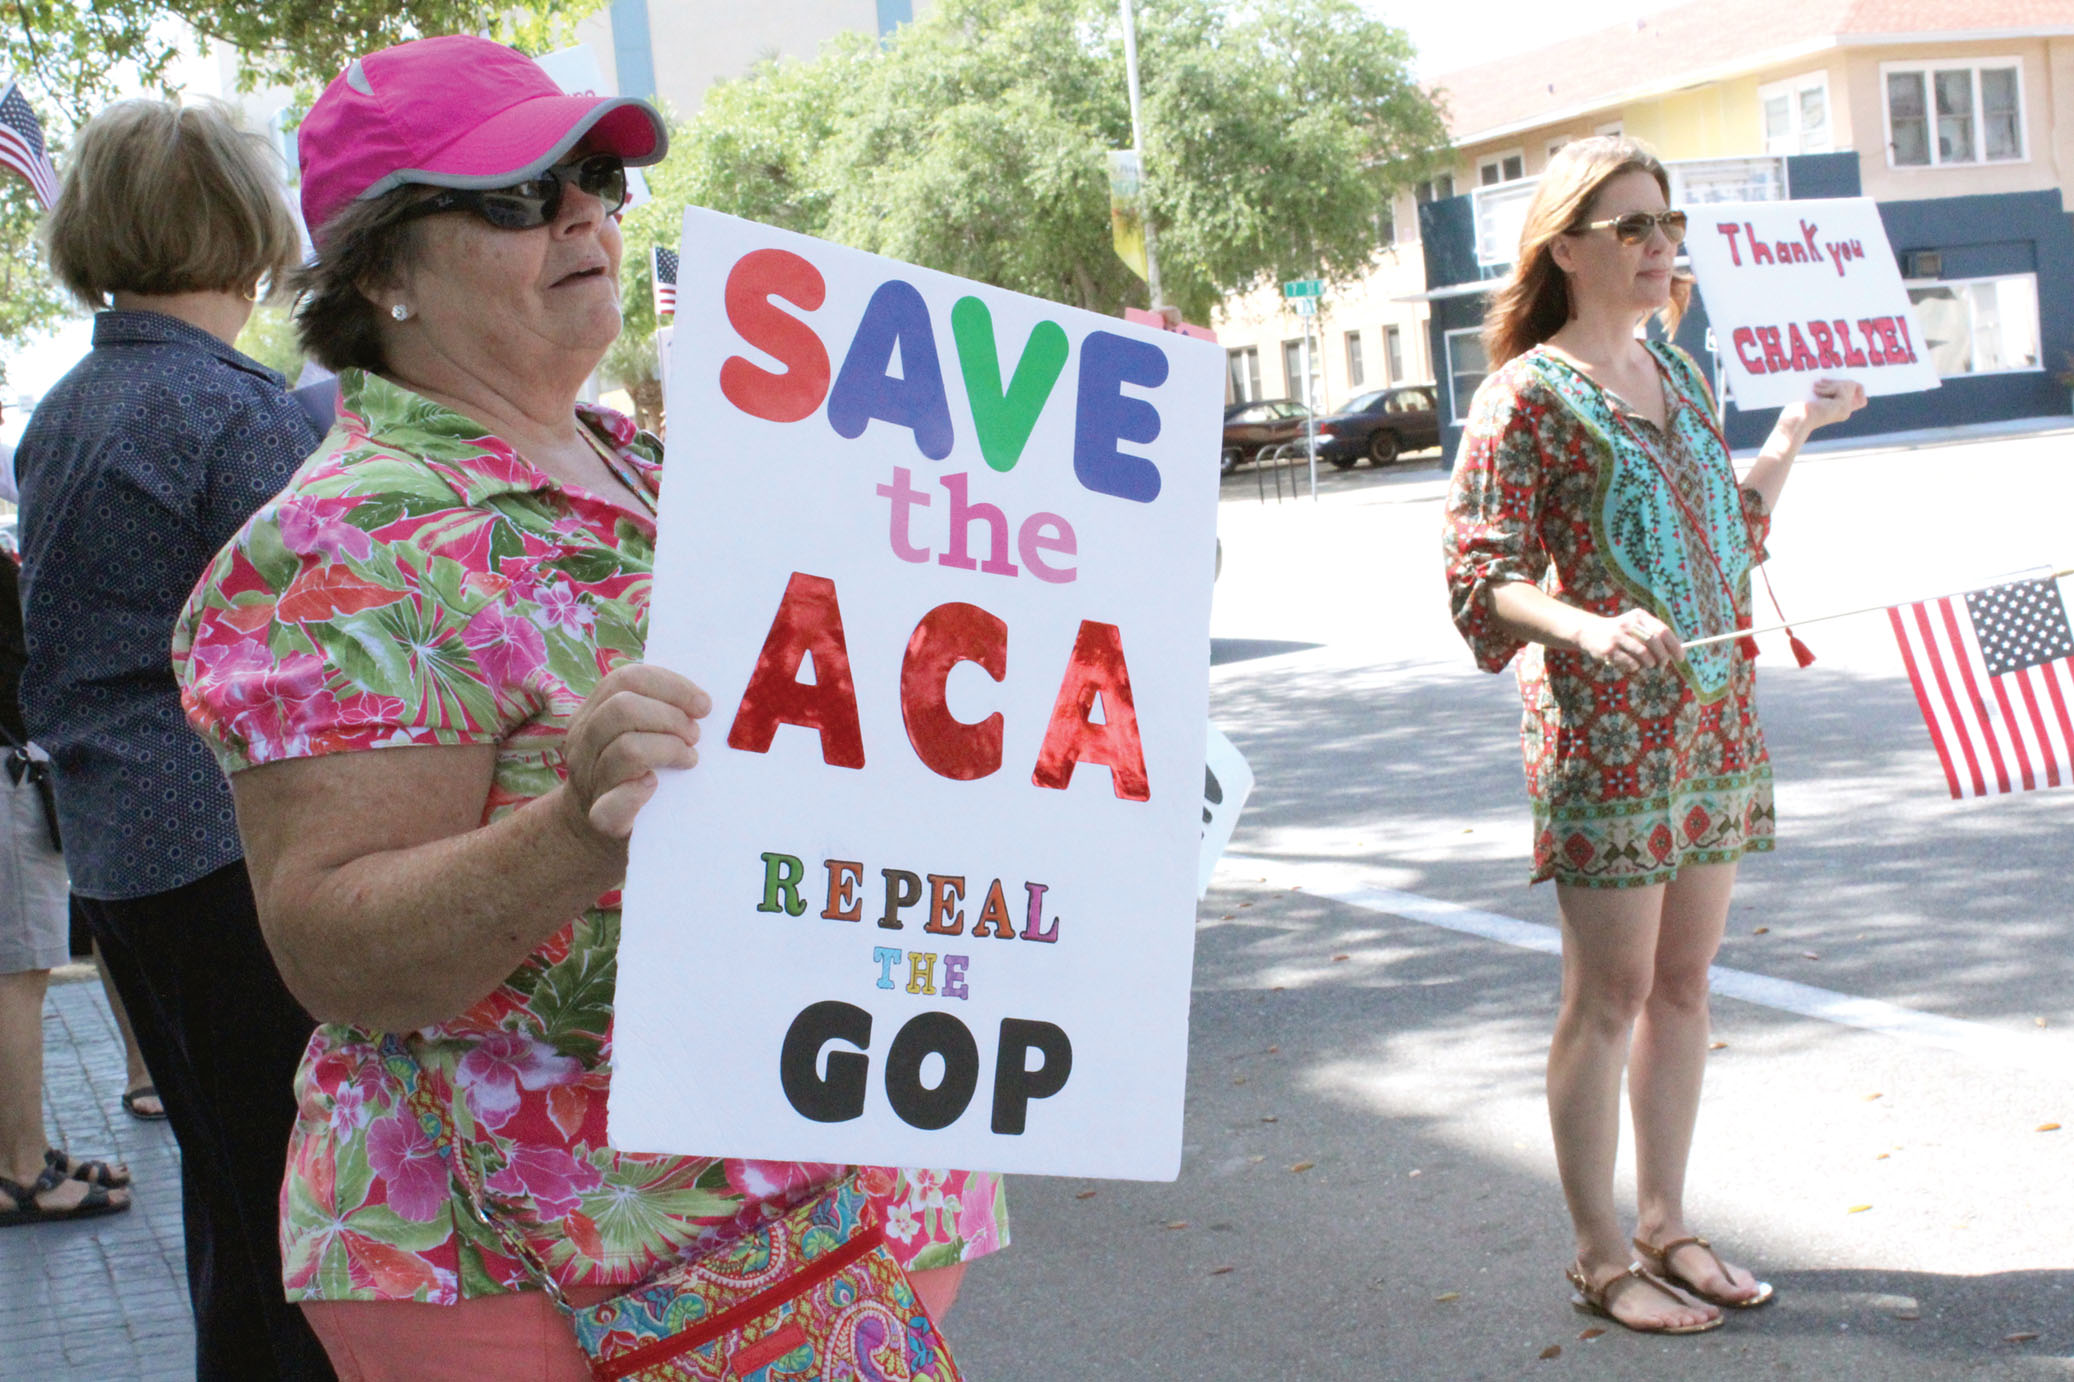 Indivisible Activism: Jean Nelson (left) and Sandra Acton (right) hold signs in front of Rep. Charlie Crist's office on Friday, March 24. Nelson., Acton and other members of Indivisible FL-13 met there to rally and thank Crist for promising to vote against the American Health Care Act. Nicole Carroll | The Crow's Nest